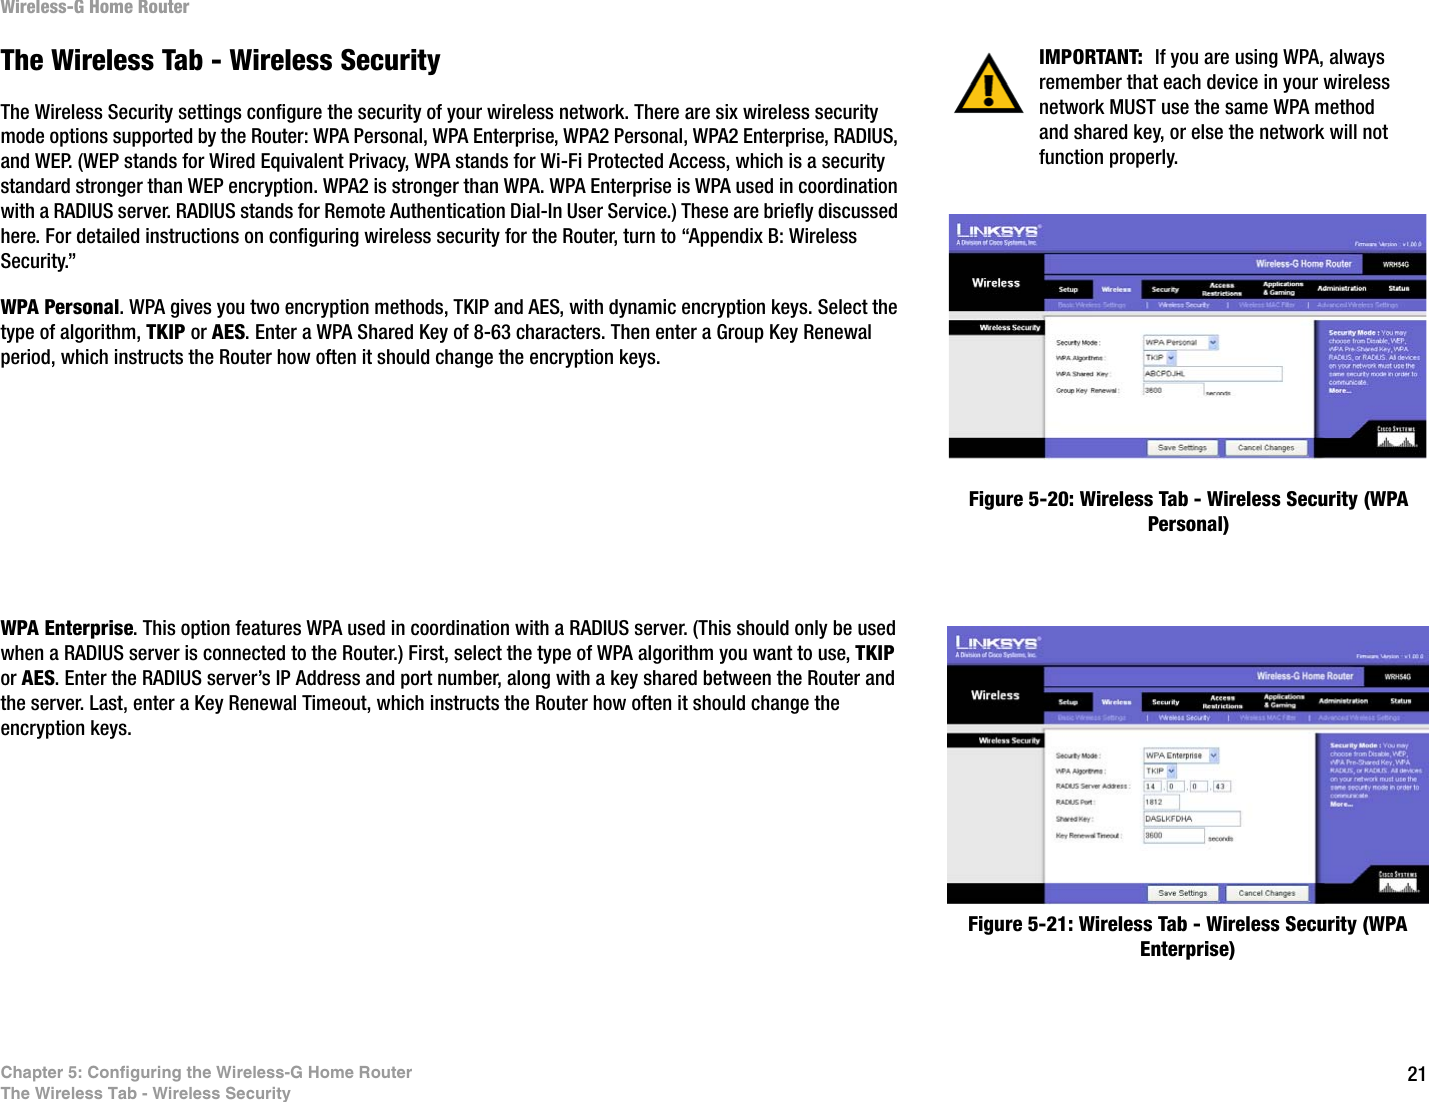 21Chapter 5: Configuring the Wireless-G Home RouterThe Wireless Tab - Wireless SecurityWireless-G Home RouterThe Wireless Tab - Wireless SecurityThe Wireless Security settings configure the security of your wireless network. There are six wireless security mode options supported by the Router: WPA Personal, WPA Enterprise, WPA2 Personal, WPA2 Enterprise, RADIUS, and WEP. (WEP stands for Wired Equivalent Privacy, WPA stands for Wi-Fi Protected Access, which is a security standard stronger than WEP encryption. WPA2 is stronger than WPA. WPA Enterprise is WPA used in coordination with a RADIUS server. RADIUS stands for Remote Authentication Dial-In User Service.) These are briefly discussed here. For detailed instructions on configuring wireless security for the Router, turn to “Appendix B: Wireless Security.”WPA Personal. WPA gives you two encryption methods, TKIP and AES, with dynamic encryption keys. Select the type of algorithm, TKIP or AES. Enter a WPA Shared Key of 8-63 characters. Then enter a Group Key Renewal period, which instructs the Router how often it should change the encryption keys.WPA Enterprise. This option features WPA used in coordination with a RADIUS server. (This should only be used when a RADIUS server is connected to the Router.) First, select the type of WPA algorithm you want to use, TKIP or AES. Enter the RADIUS server’s IP Address and port number, along with a key shared between the Router and the server. Last, enter a Key Renewal Timeout, which instructs the Router how often it should change the encryption keys.Figure 5-20: Wireless Tab - Wireless Security (WPA Personal)Figure 5-21: Wireless Tab - Wireless Security (WPA Enterprise)IMPORTANT:  If you are using WPA, always remember that each device in your wireless network MUST use the same WPA method and shared key, or else the network will not function properly.